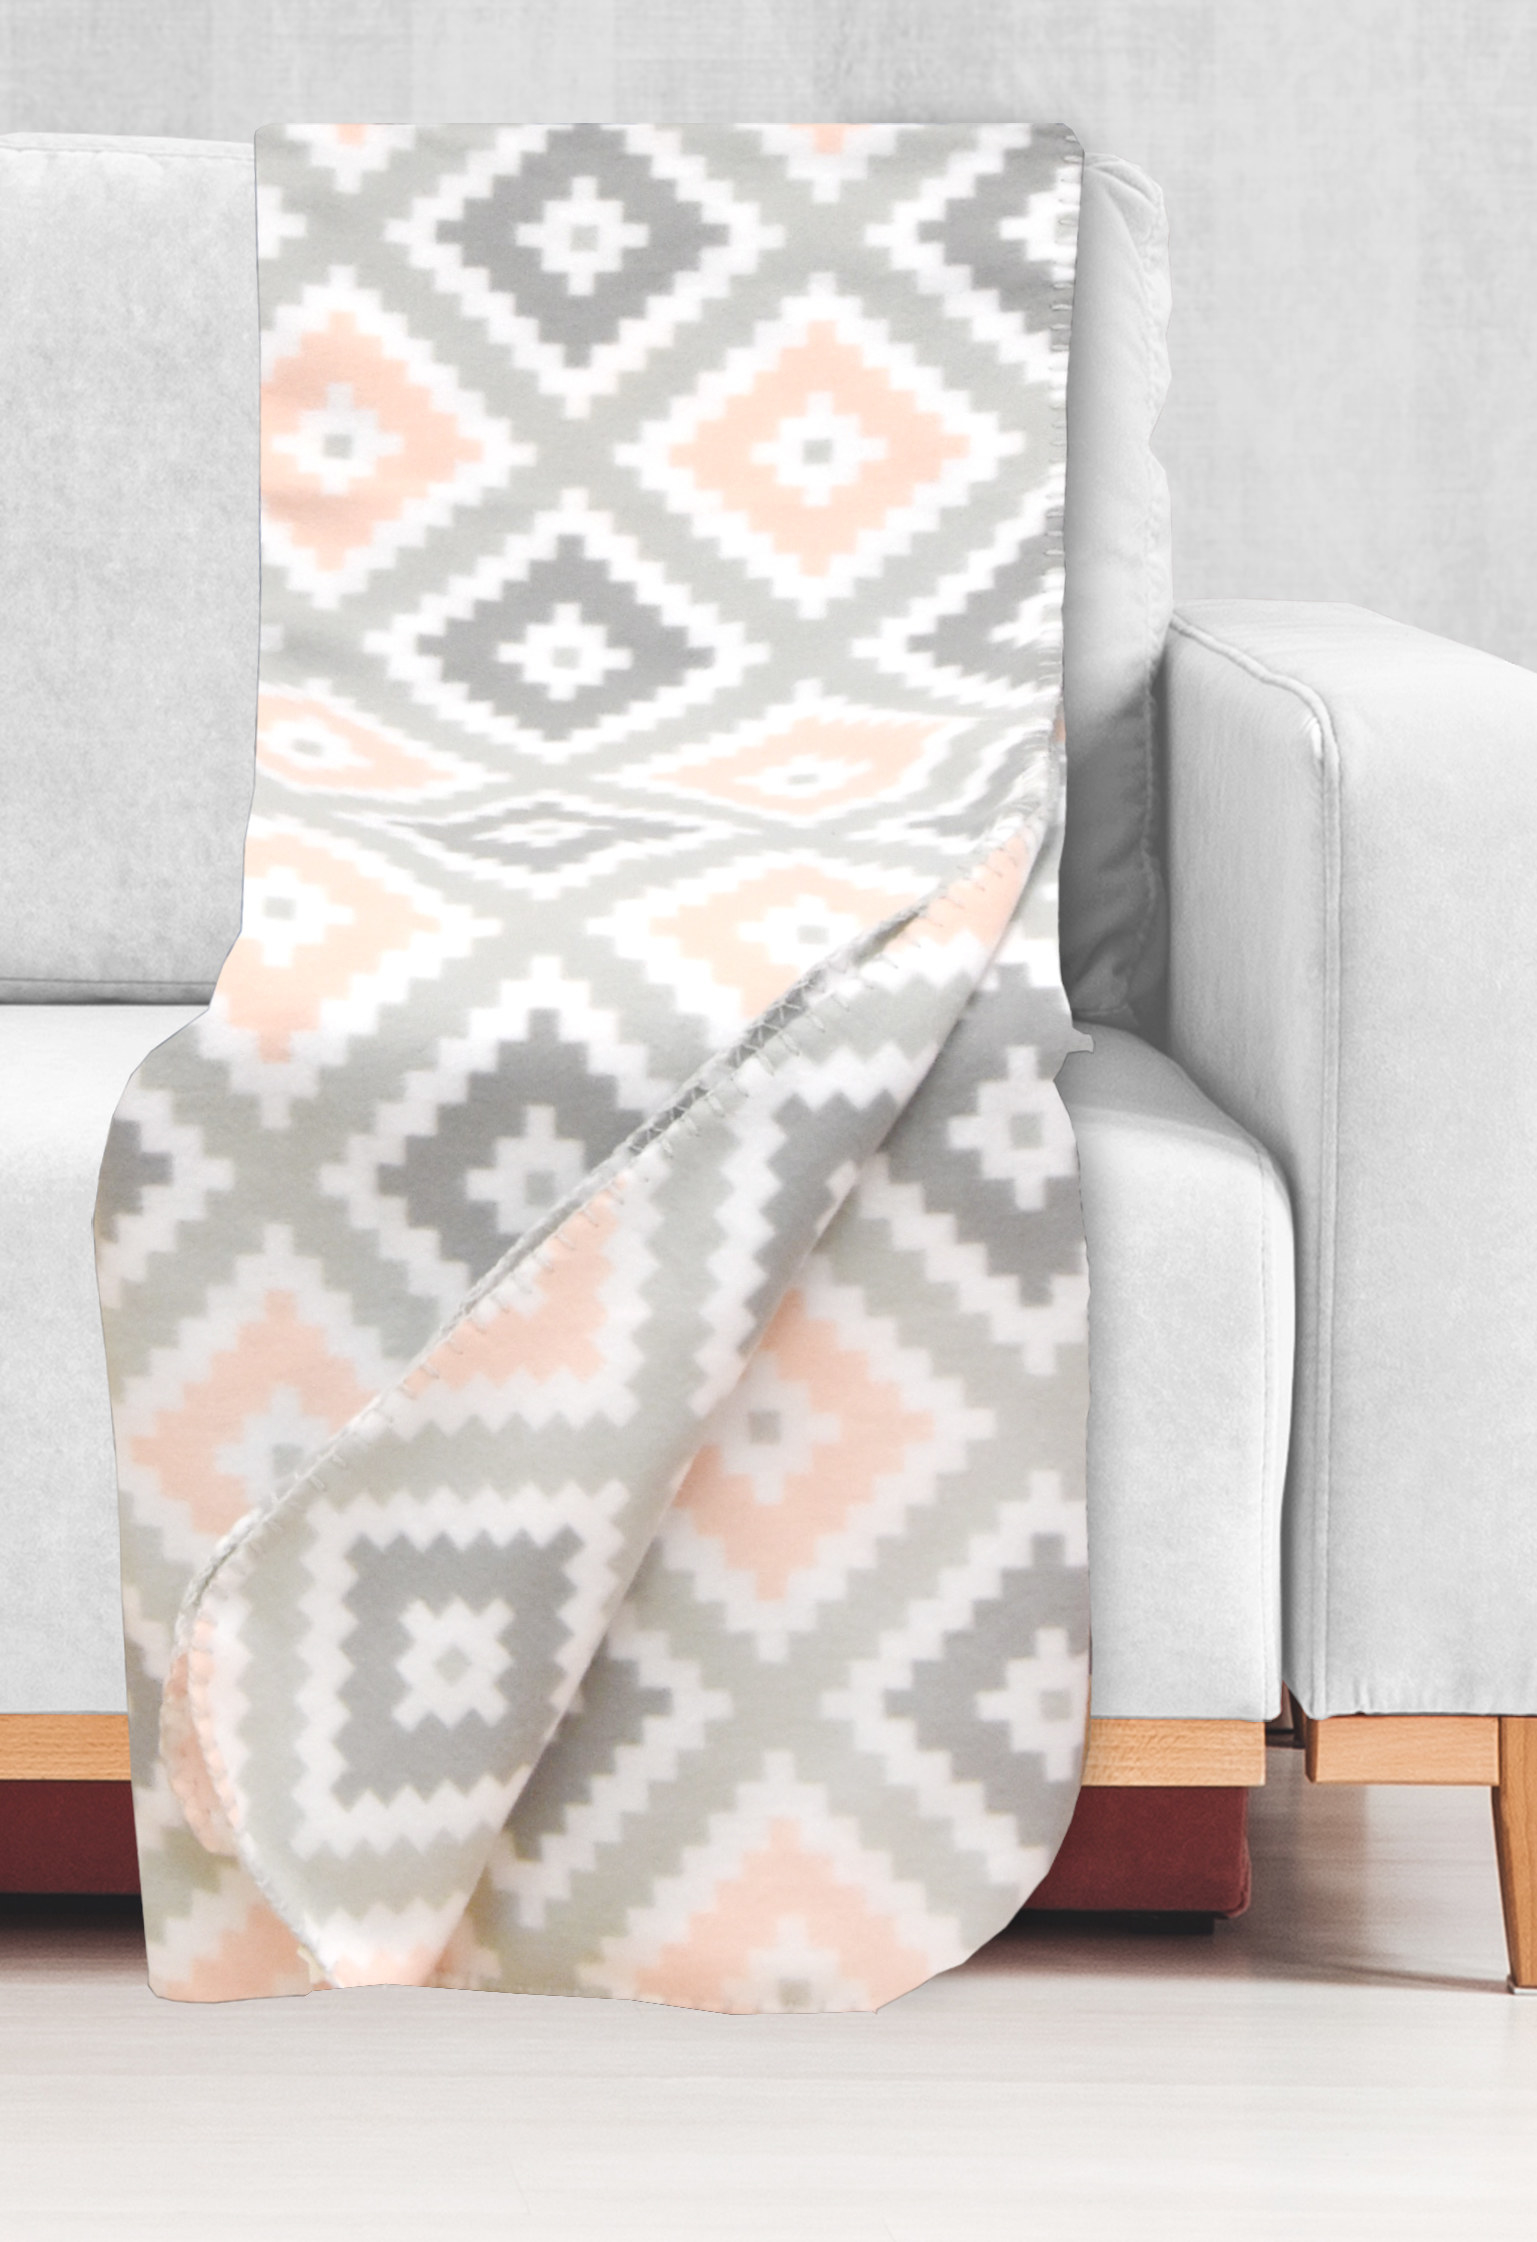 A pink and grey patterned blanket on a white couch